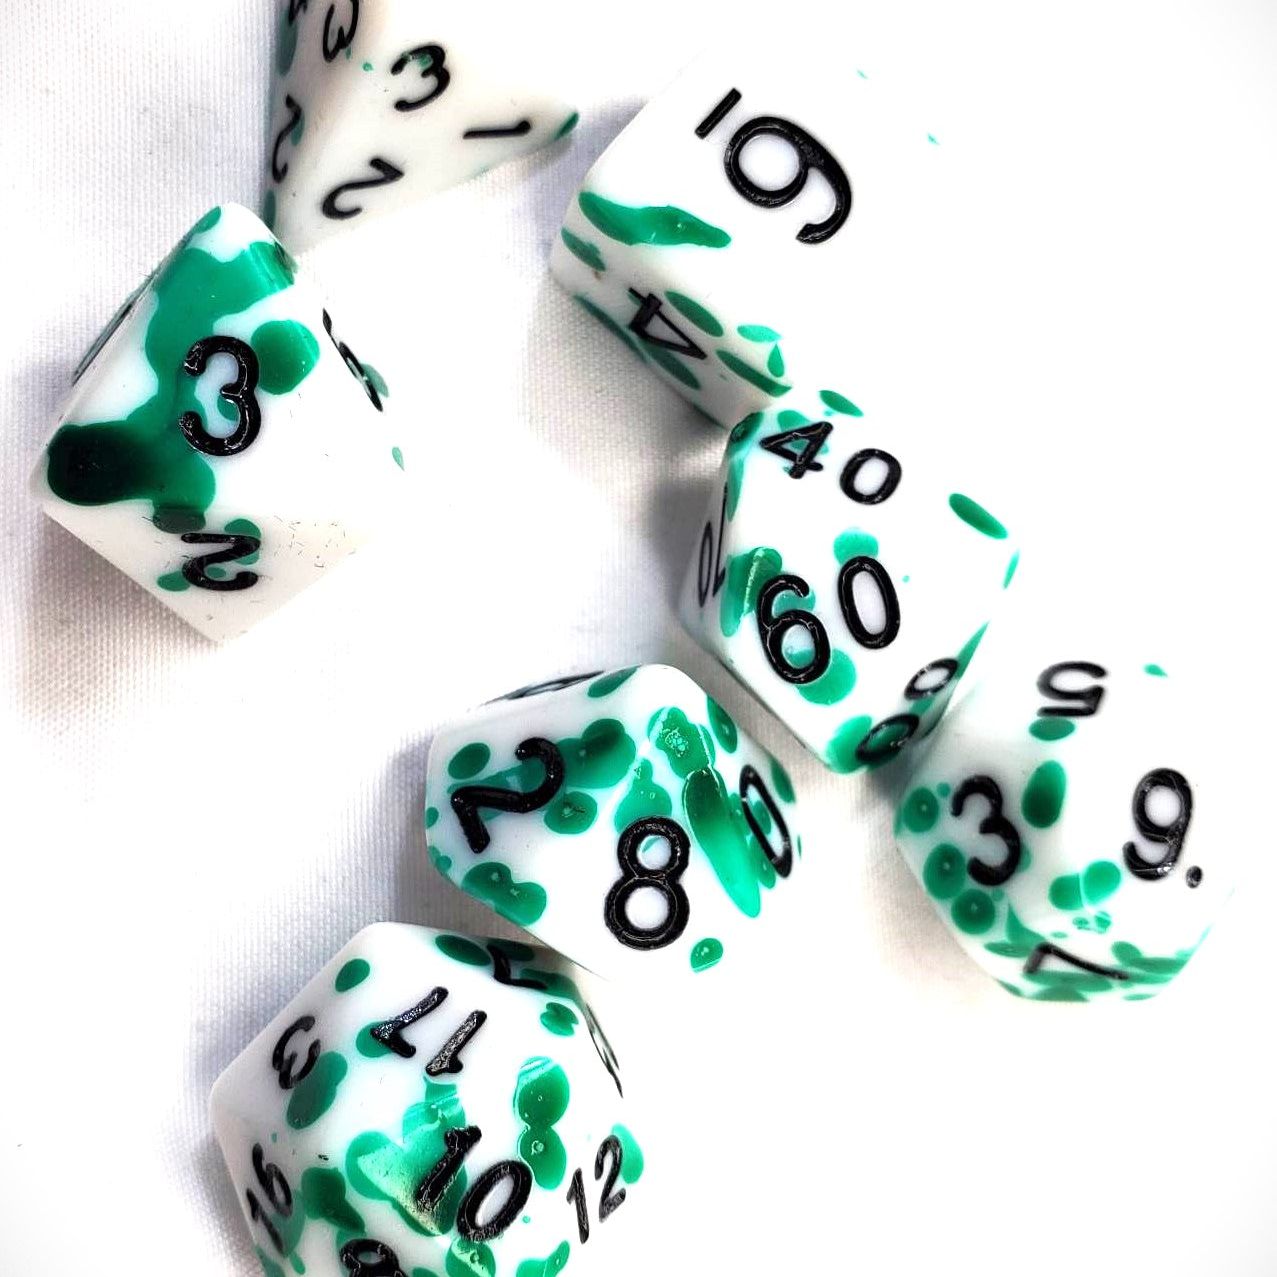 White Acrylic Dice Set with Green Splatter and Black Numbering